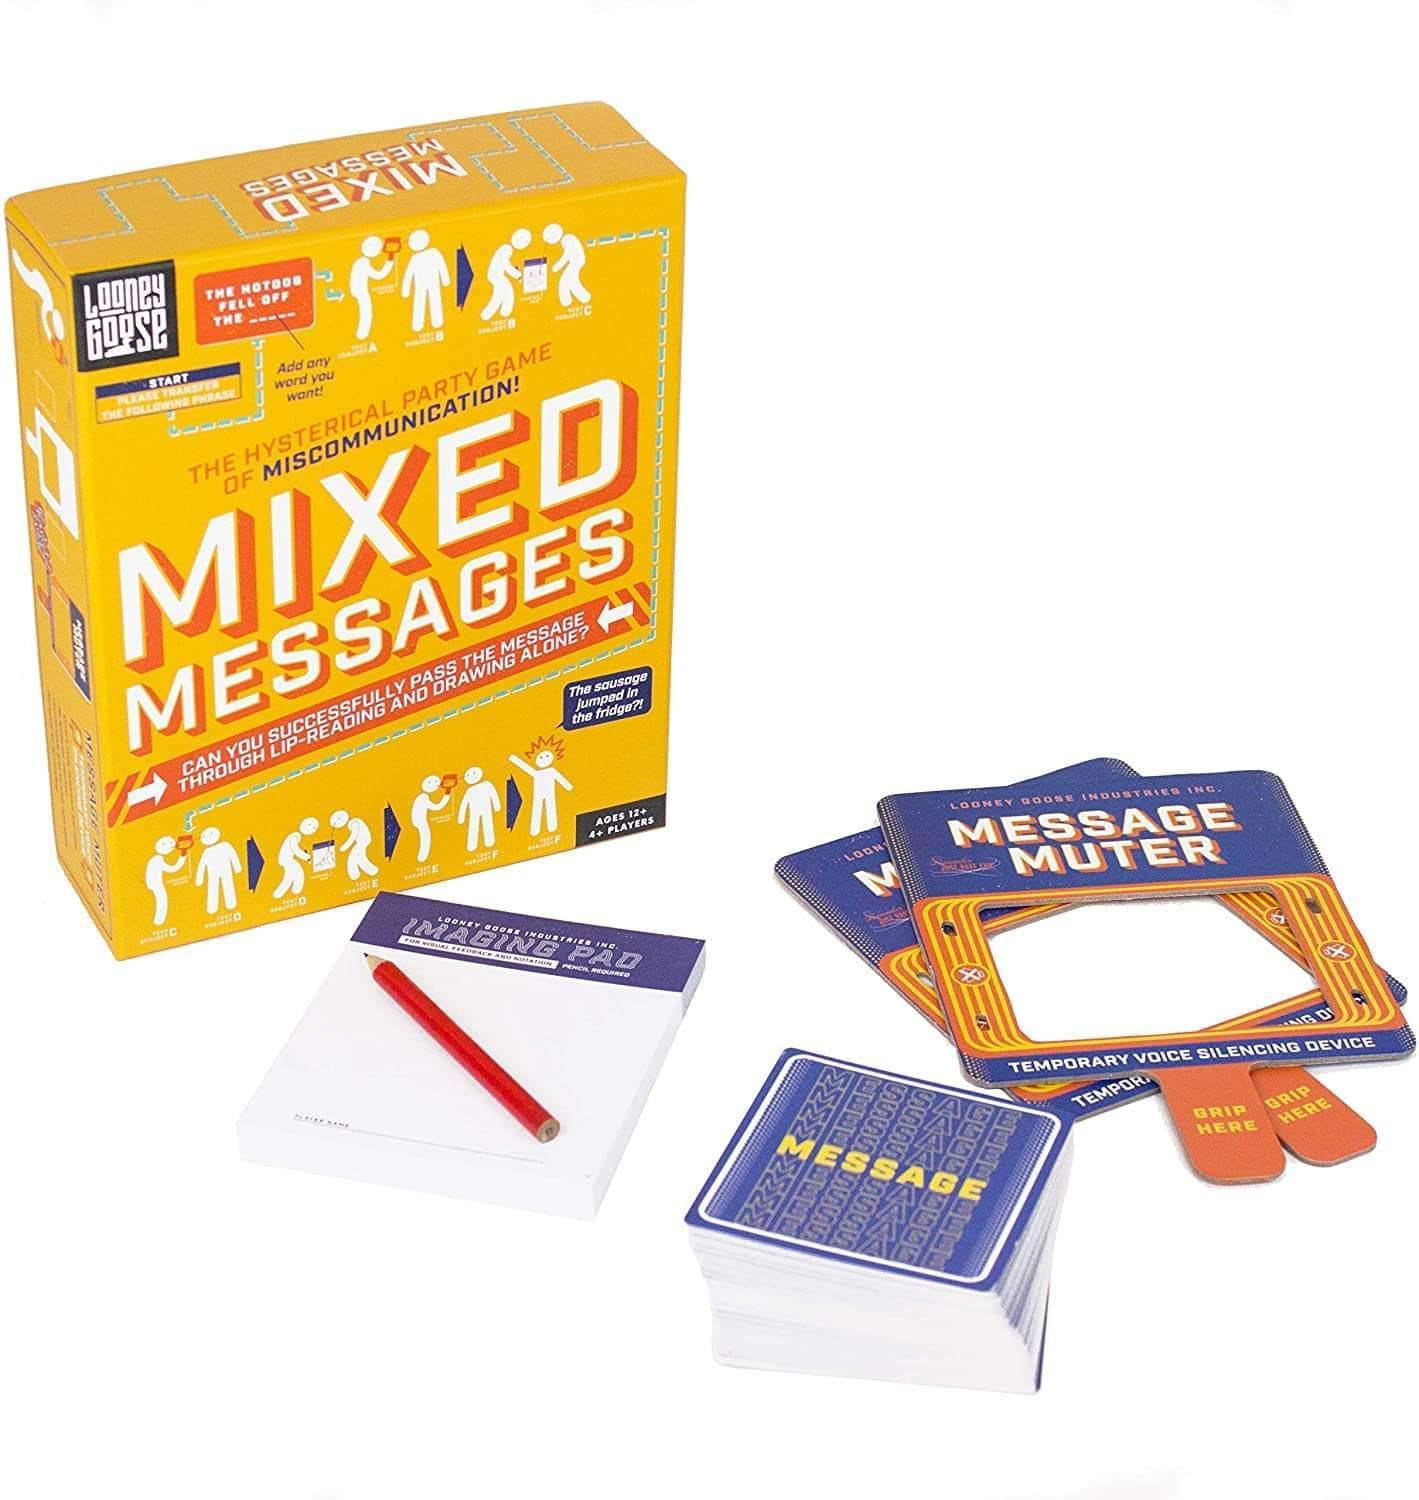 professor puzzle mixed messages lip reading drawing party game the hysterical family game of miscommunication fun indoor or outdoor activity great for party for kids adults family friends